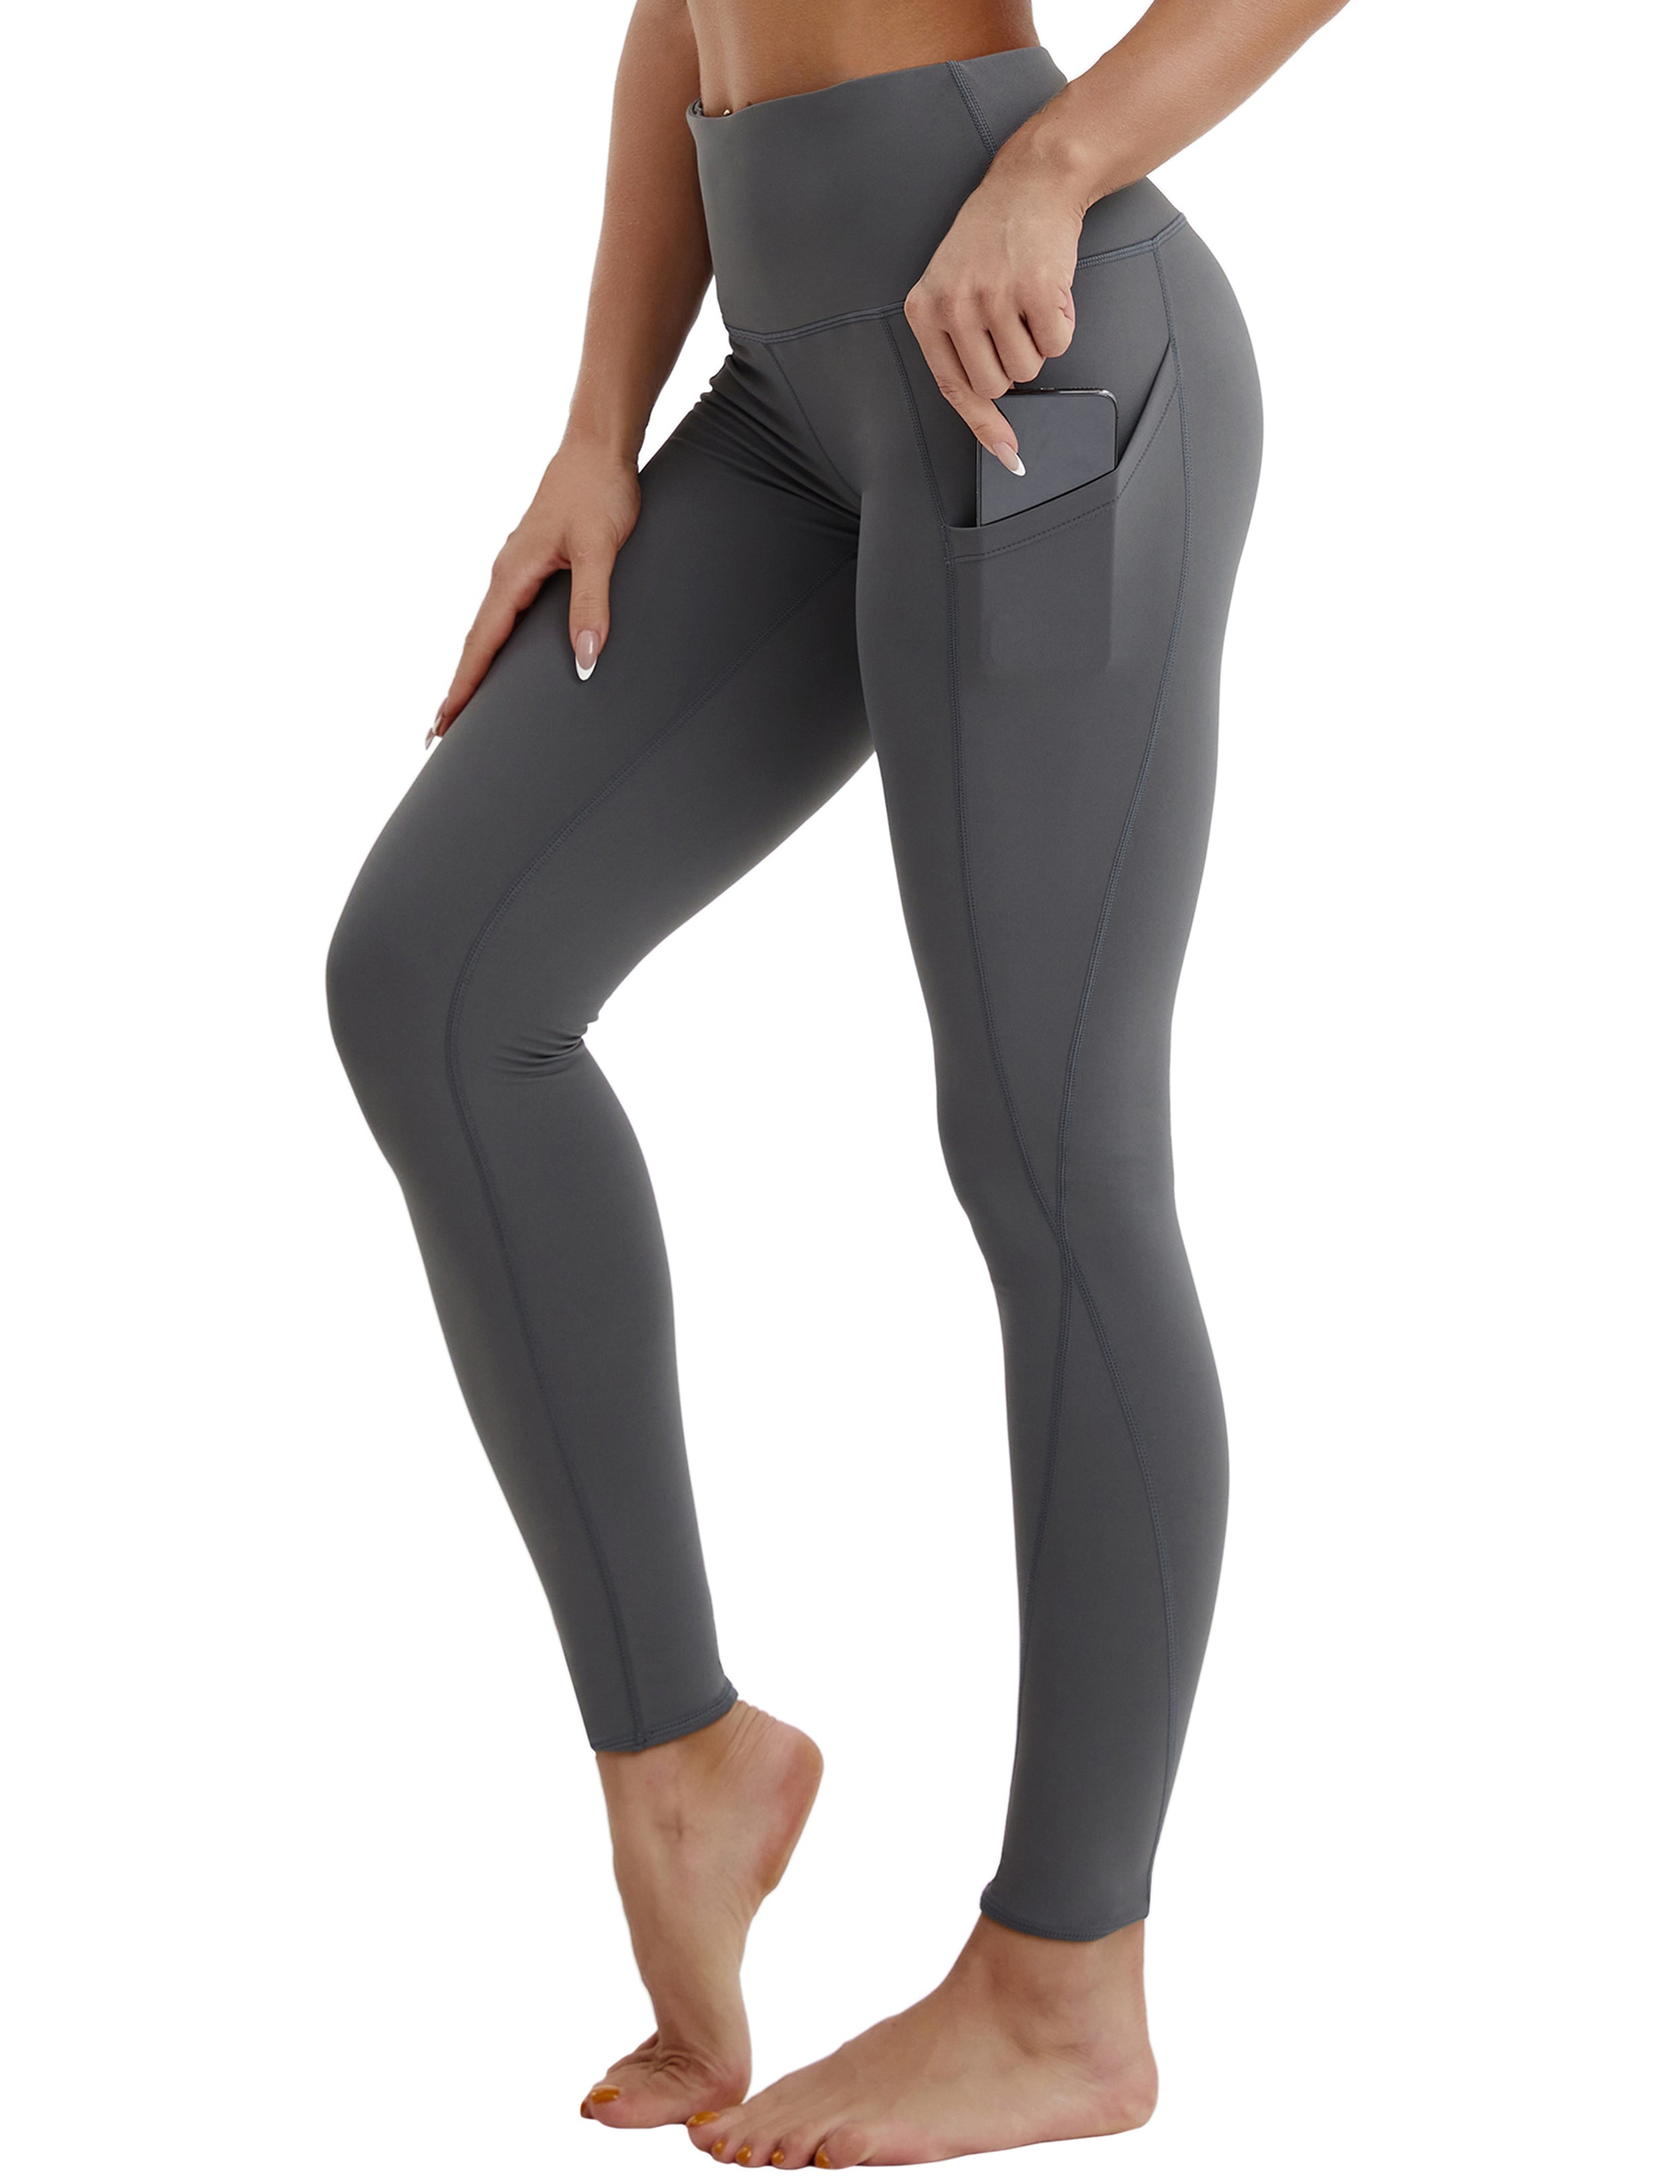 High Waist Side Pockets Jogging Pants shadowcharcoal 75% Nylon, 25% Spandex Fabric doesn't attract lint easily 4-way stretch No see-through Moisture-wicking Tummy control Inner pocket